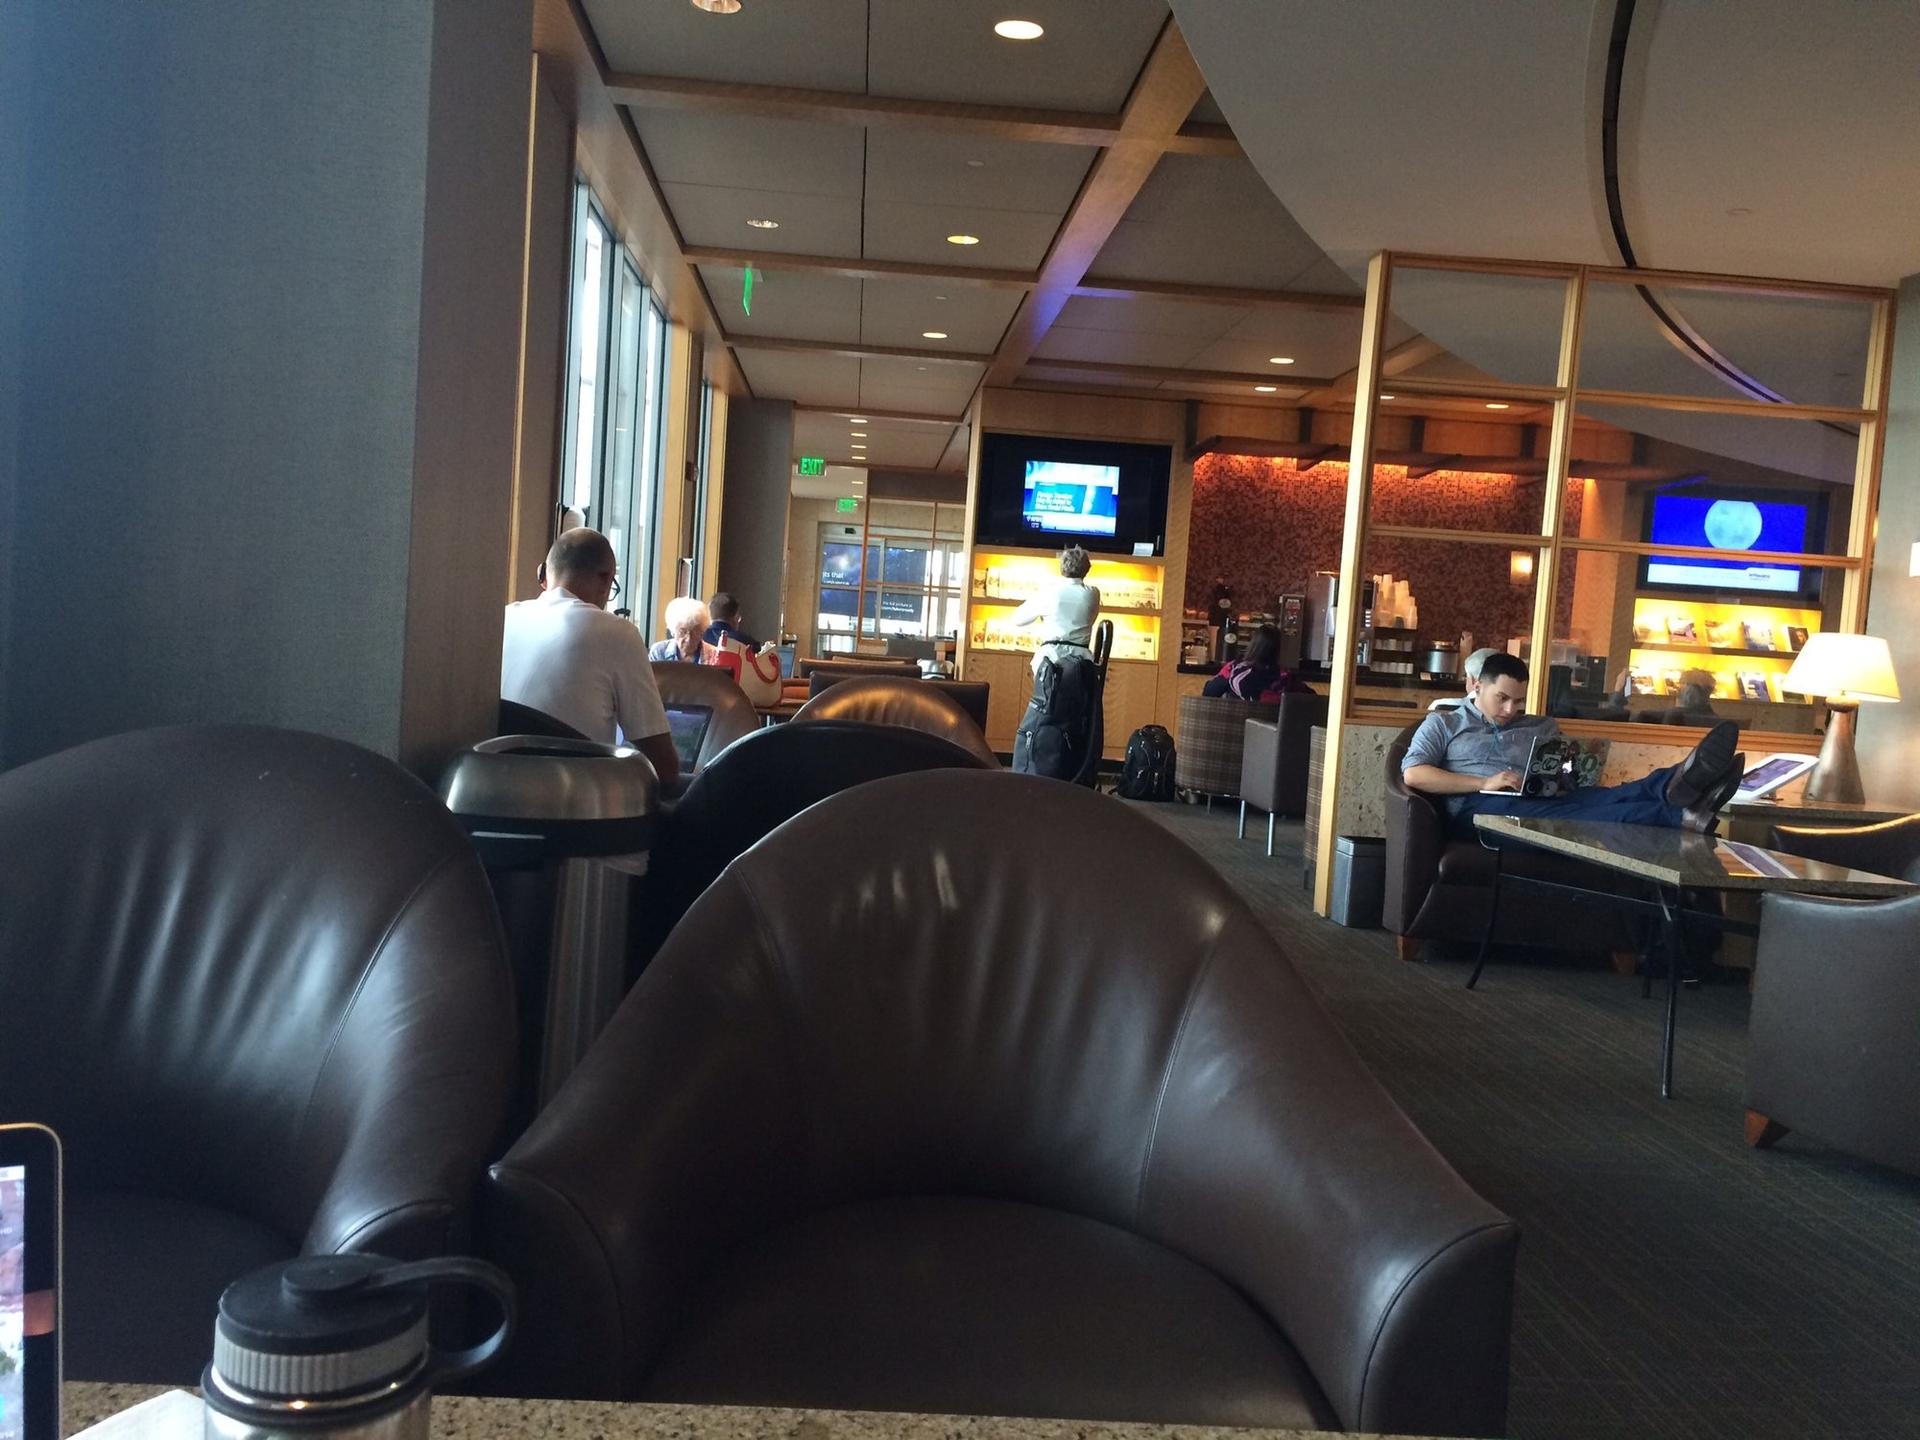 American Airlines Admirals Club image 6 of 14